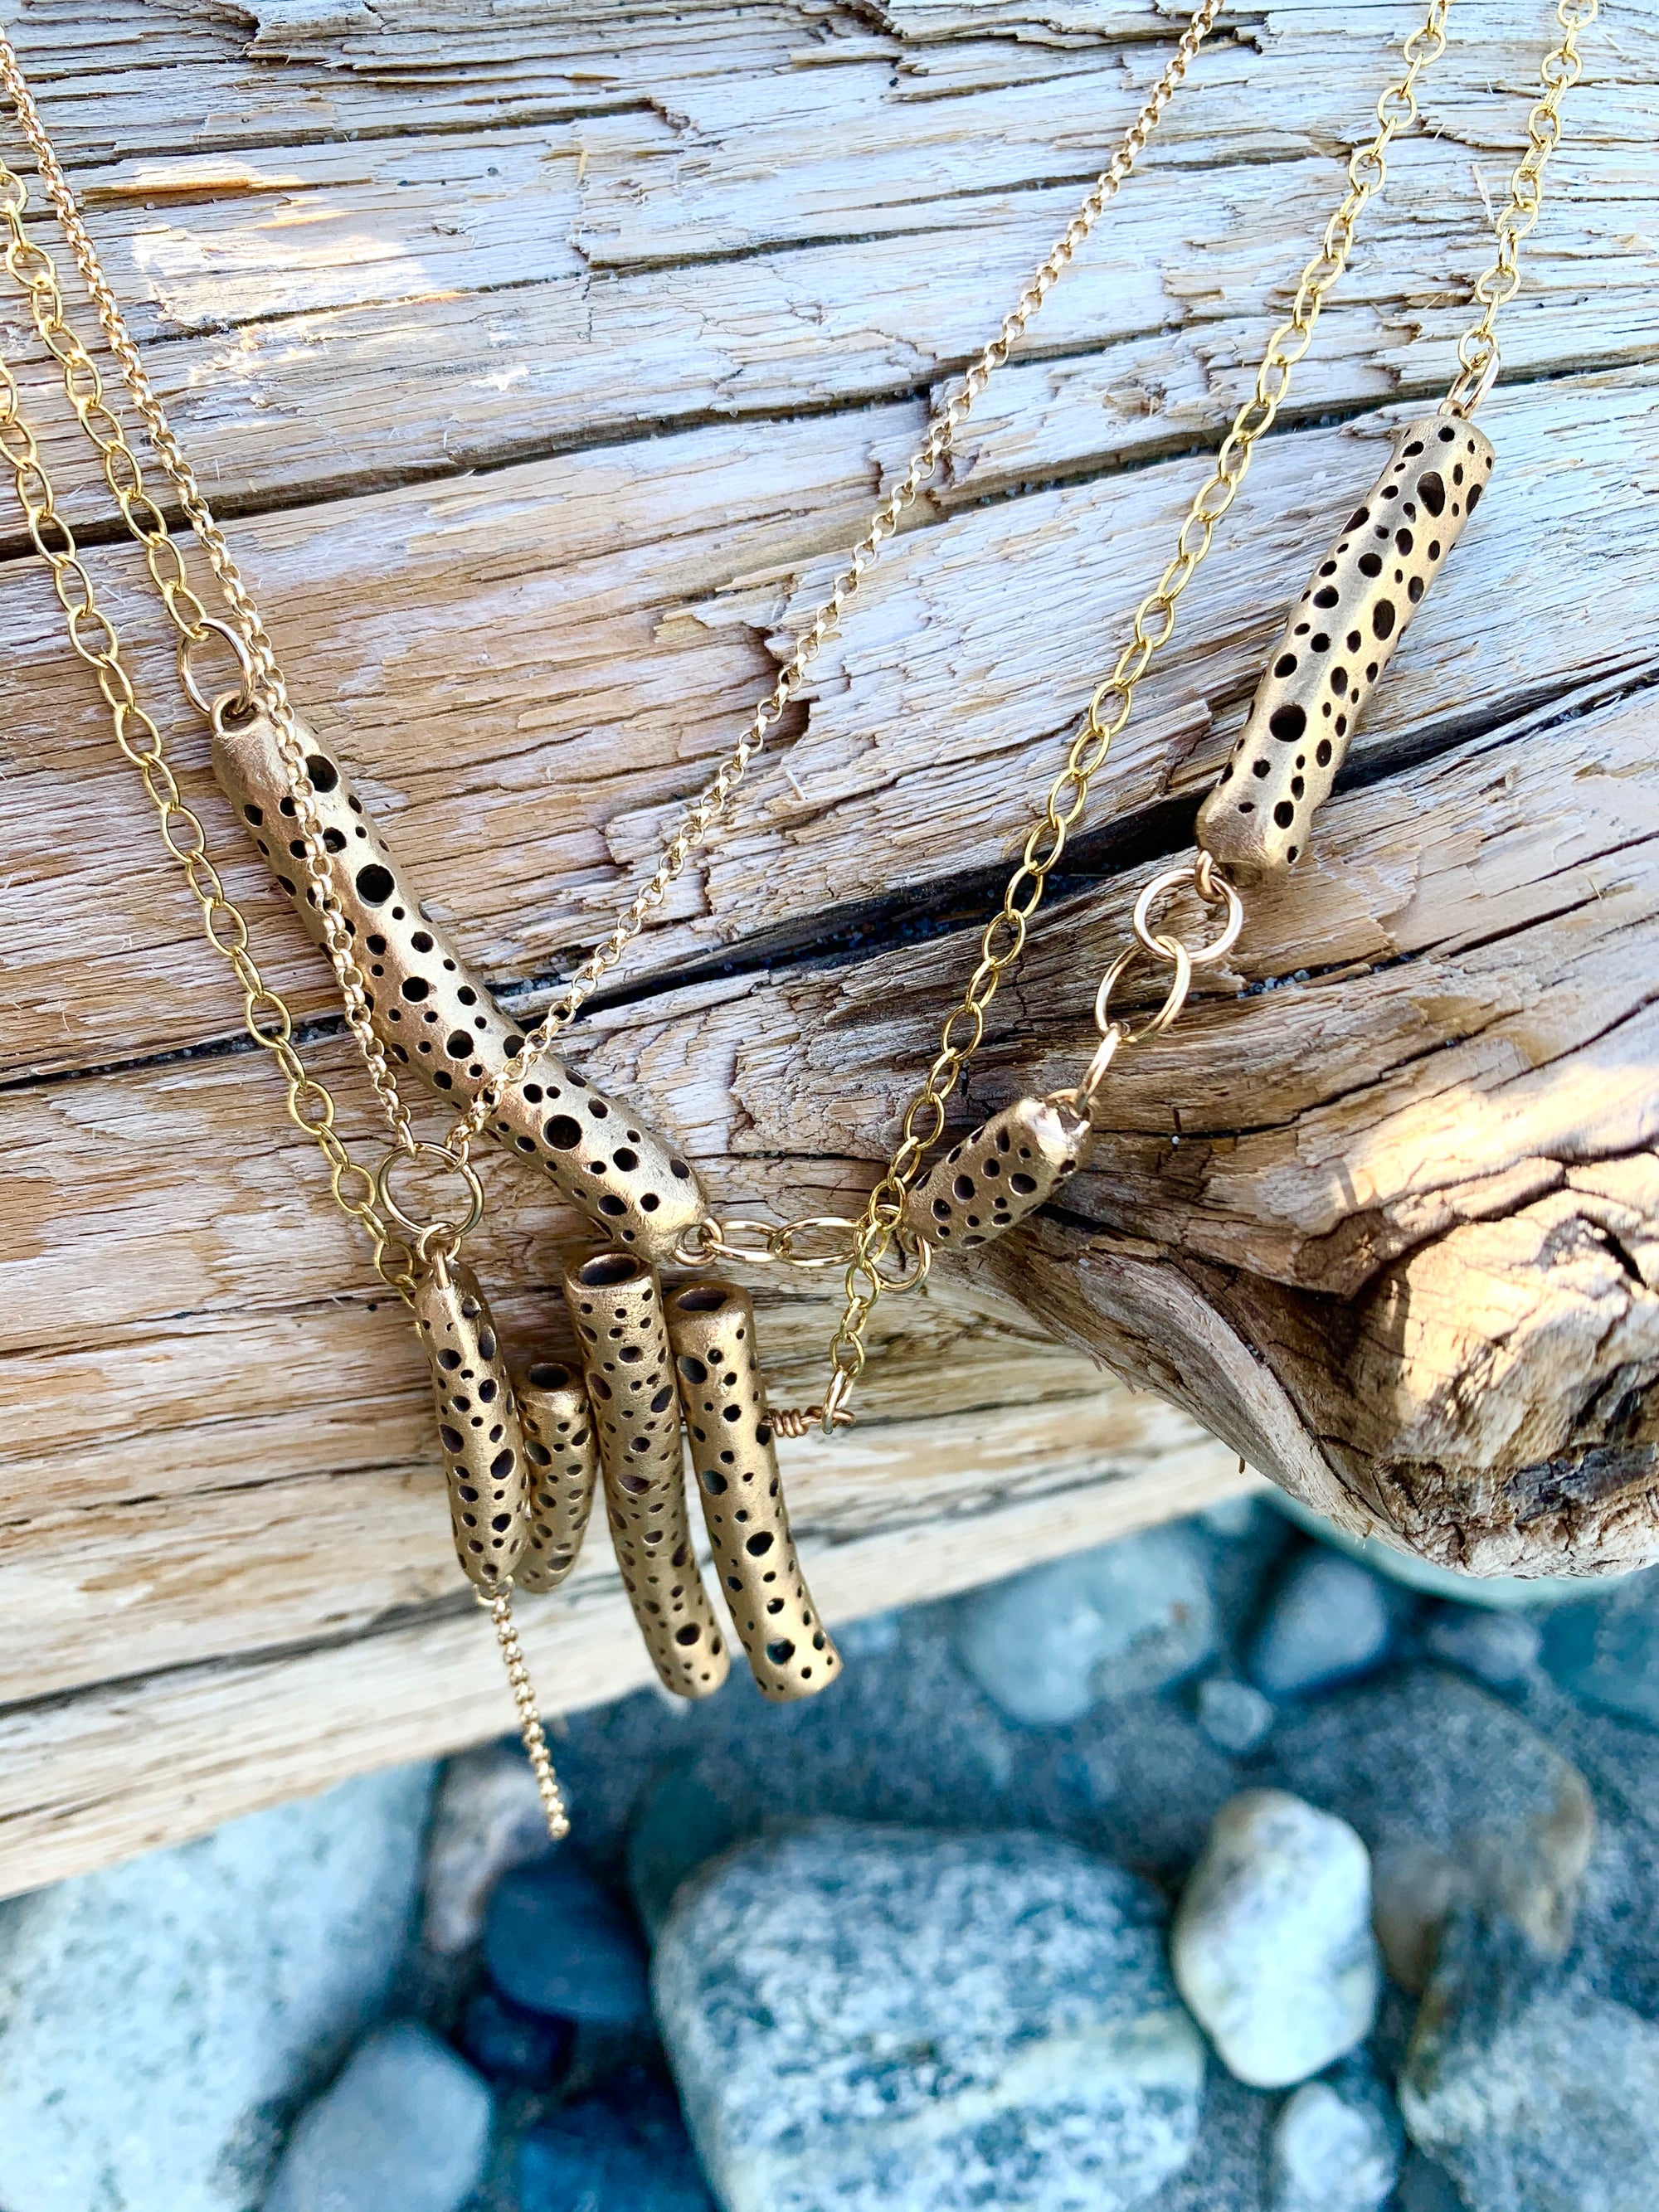 Just {bronze} jewelry hanging out at the beach